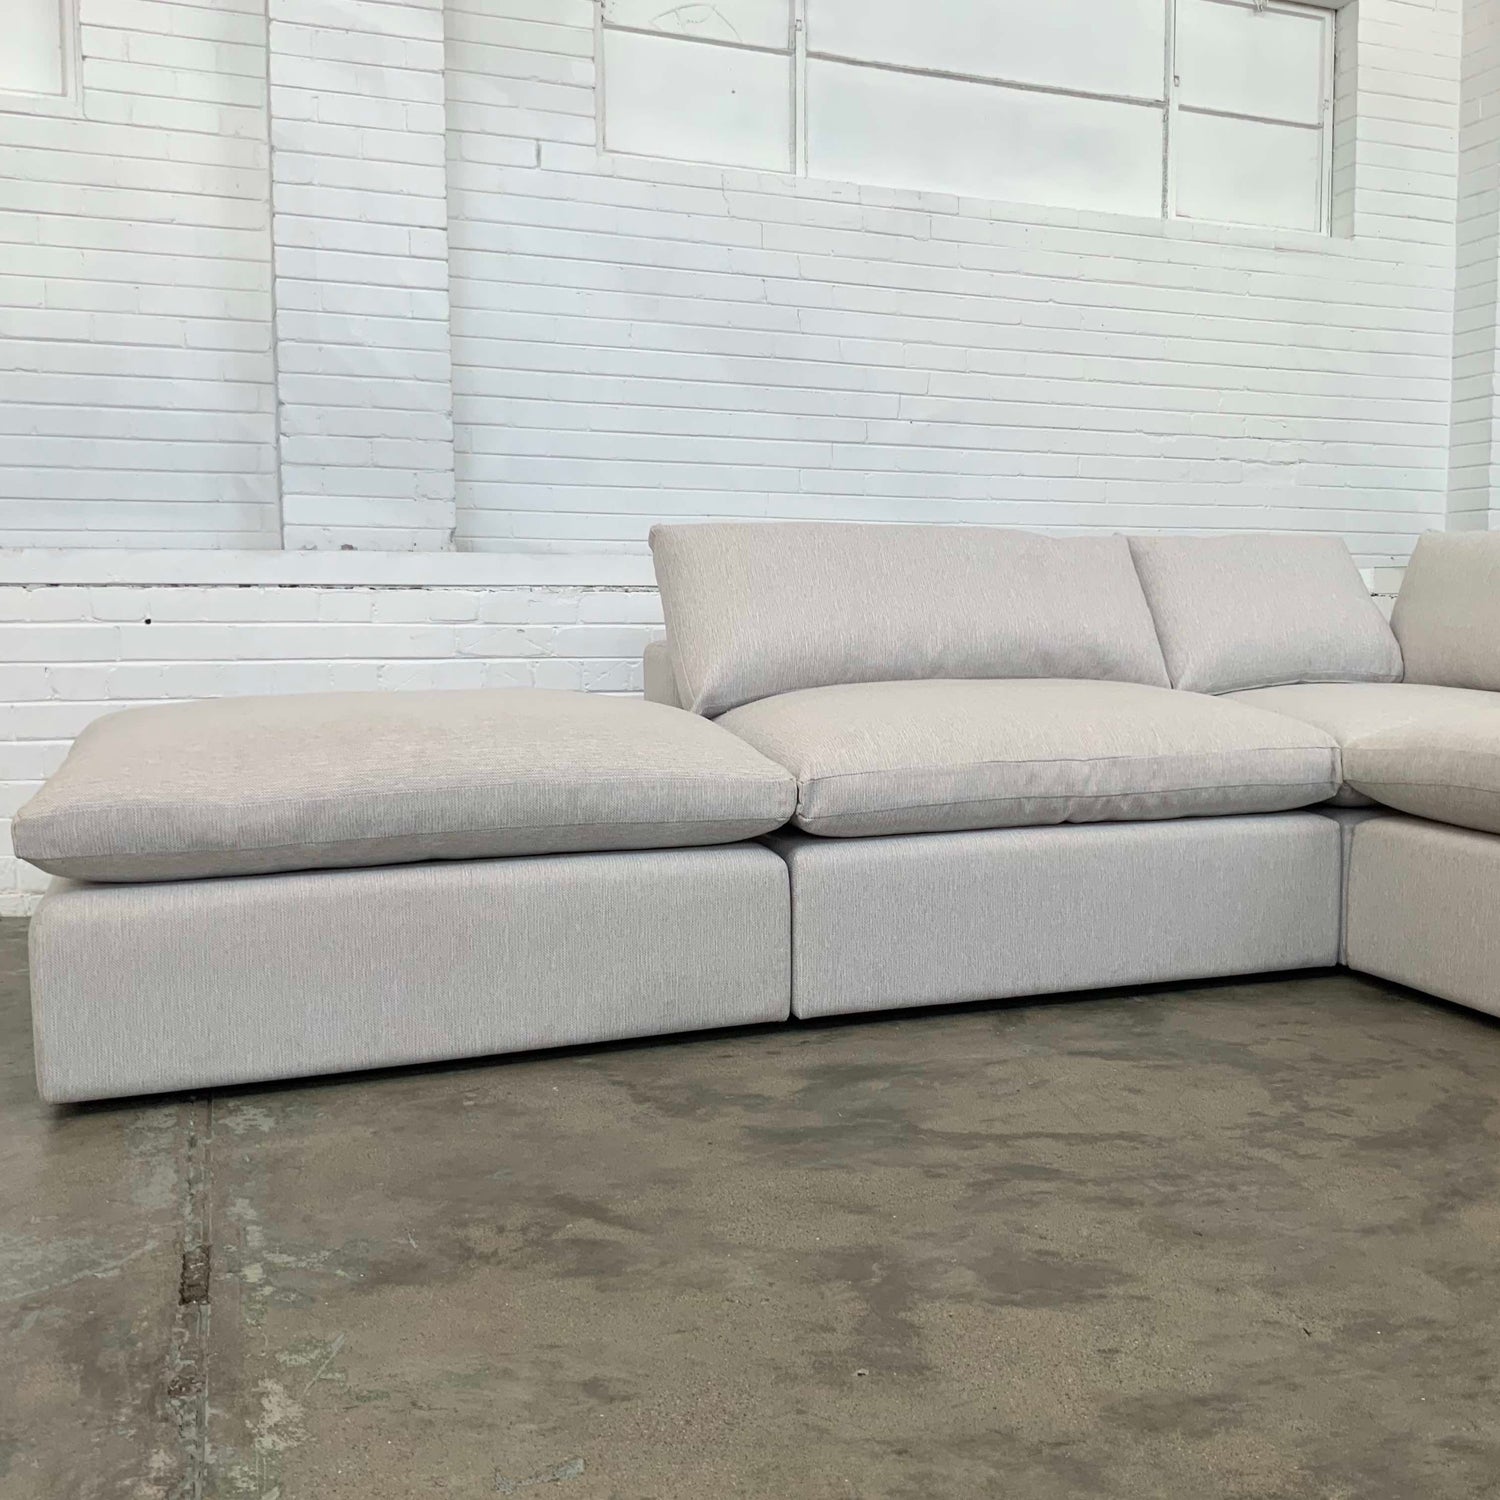 Stratus Modular Sofa | Value Range Fabrics Multiple Sizes And Options Available Made To Order In Wa